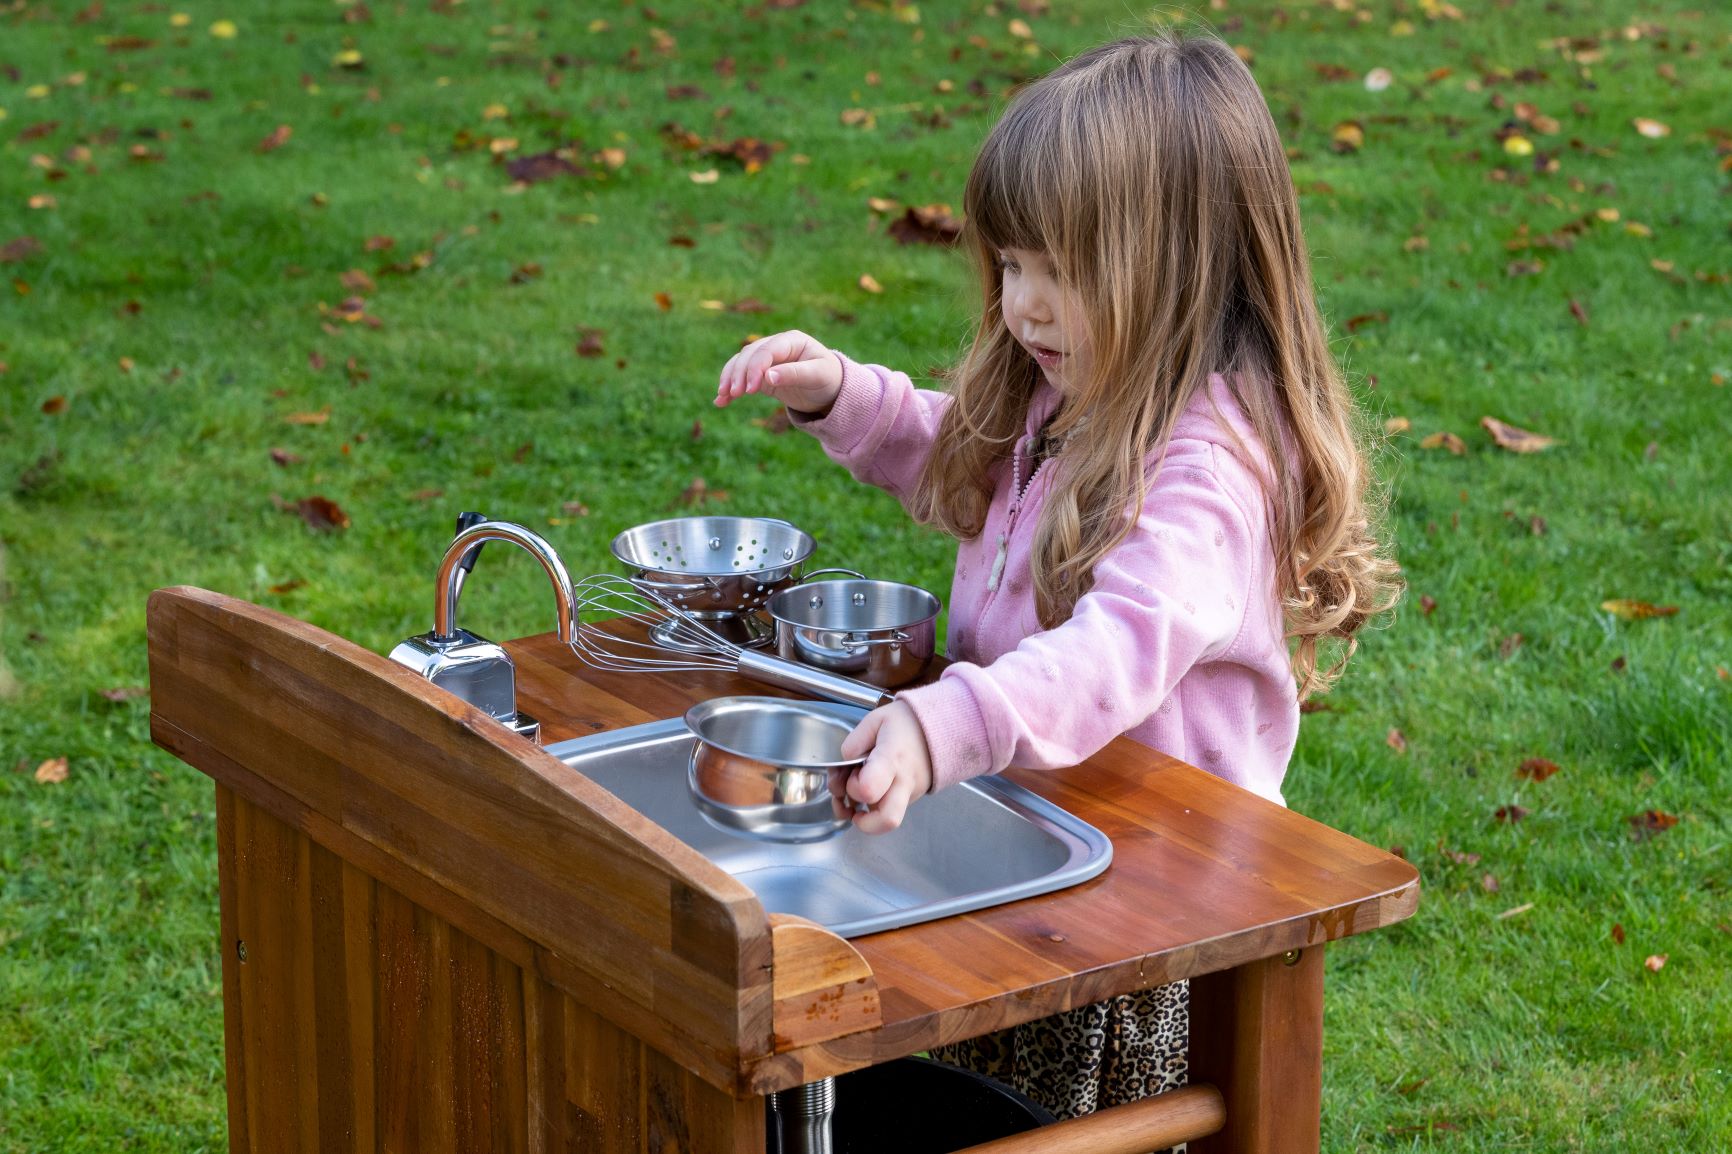 Outdoor Wooden Mobile Water Table